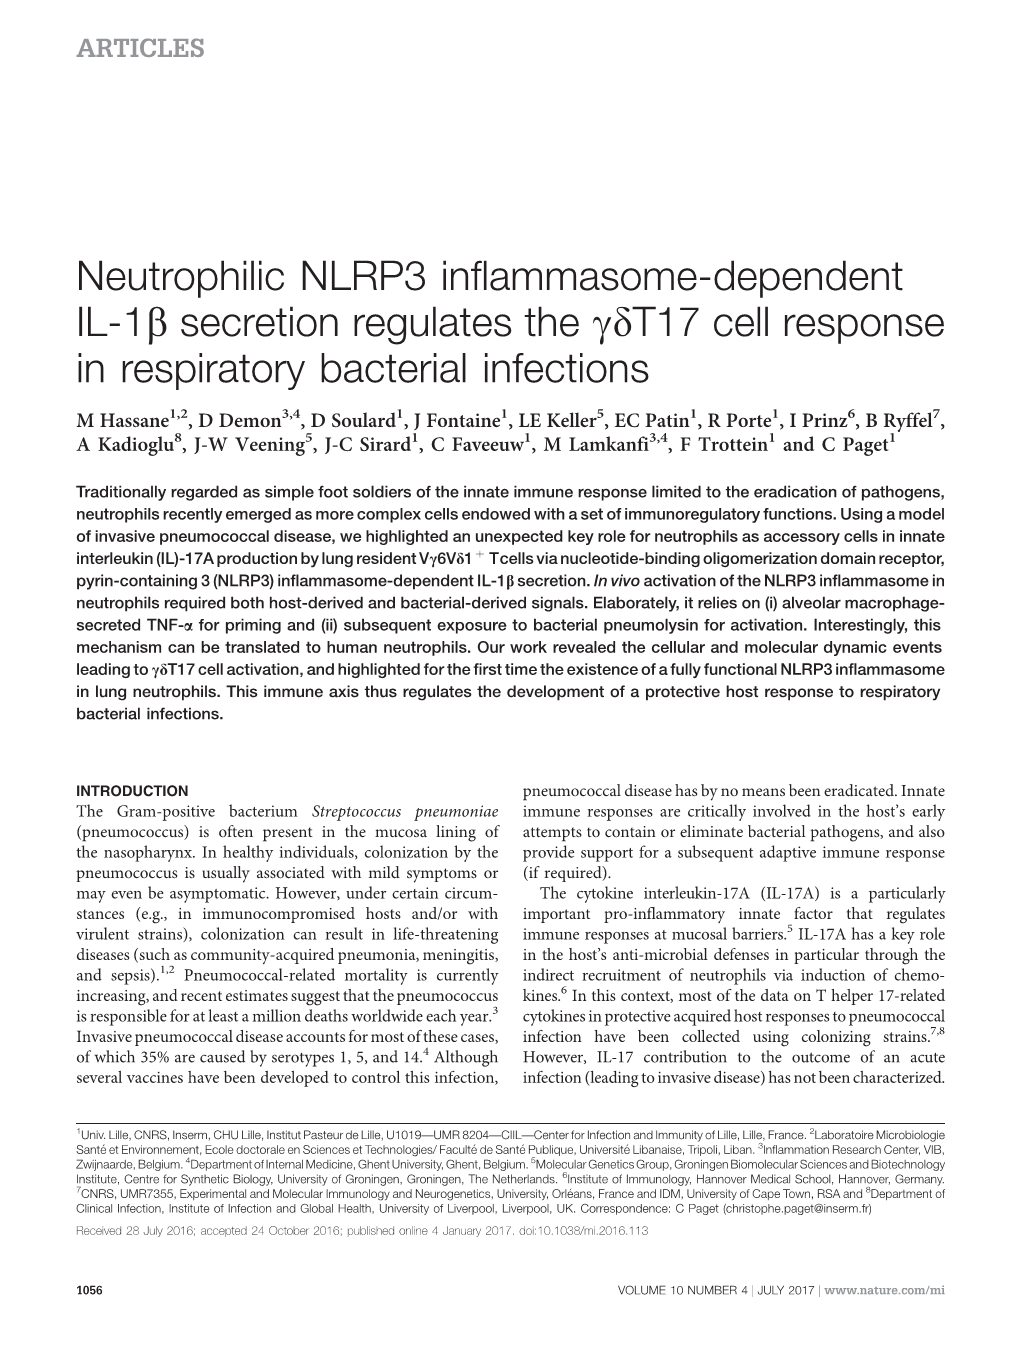 Neutrophilic NLRP3 Inflammasome-Dependent IL-1B Secretion Regulates the Gdt17 Cell Response in Respiratory Bacterial Infections